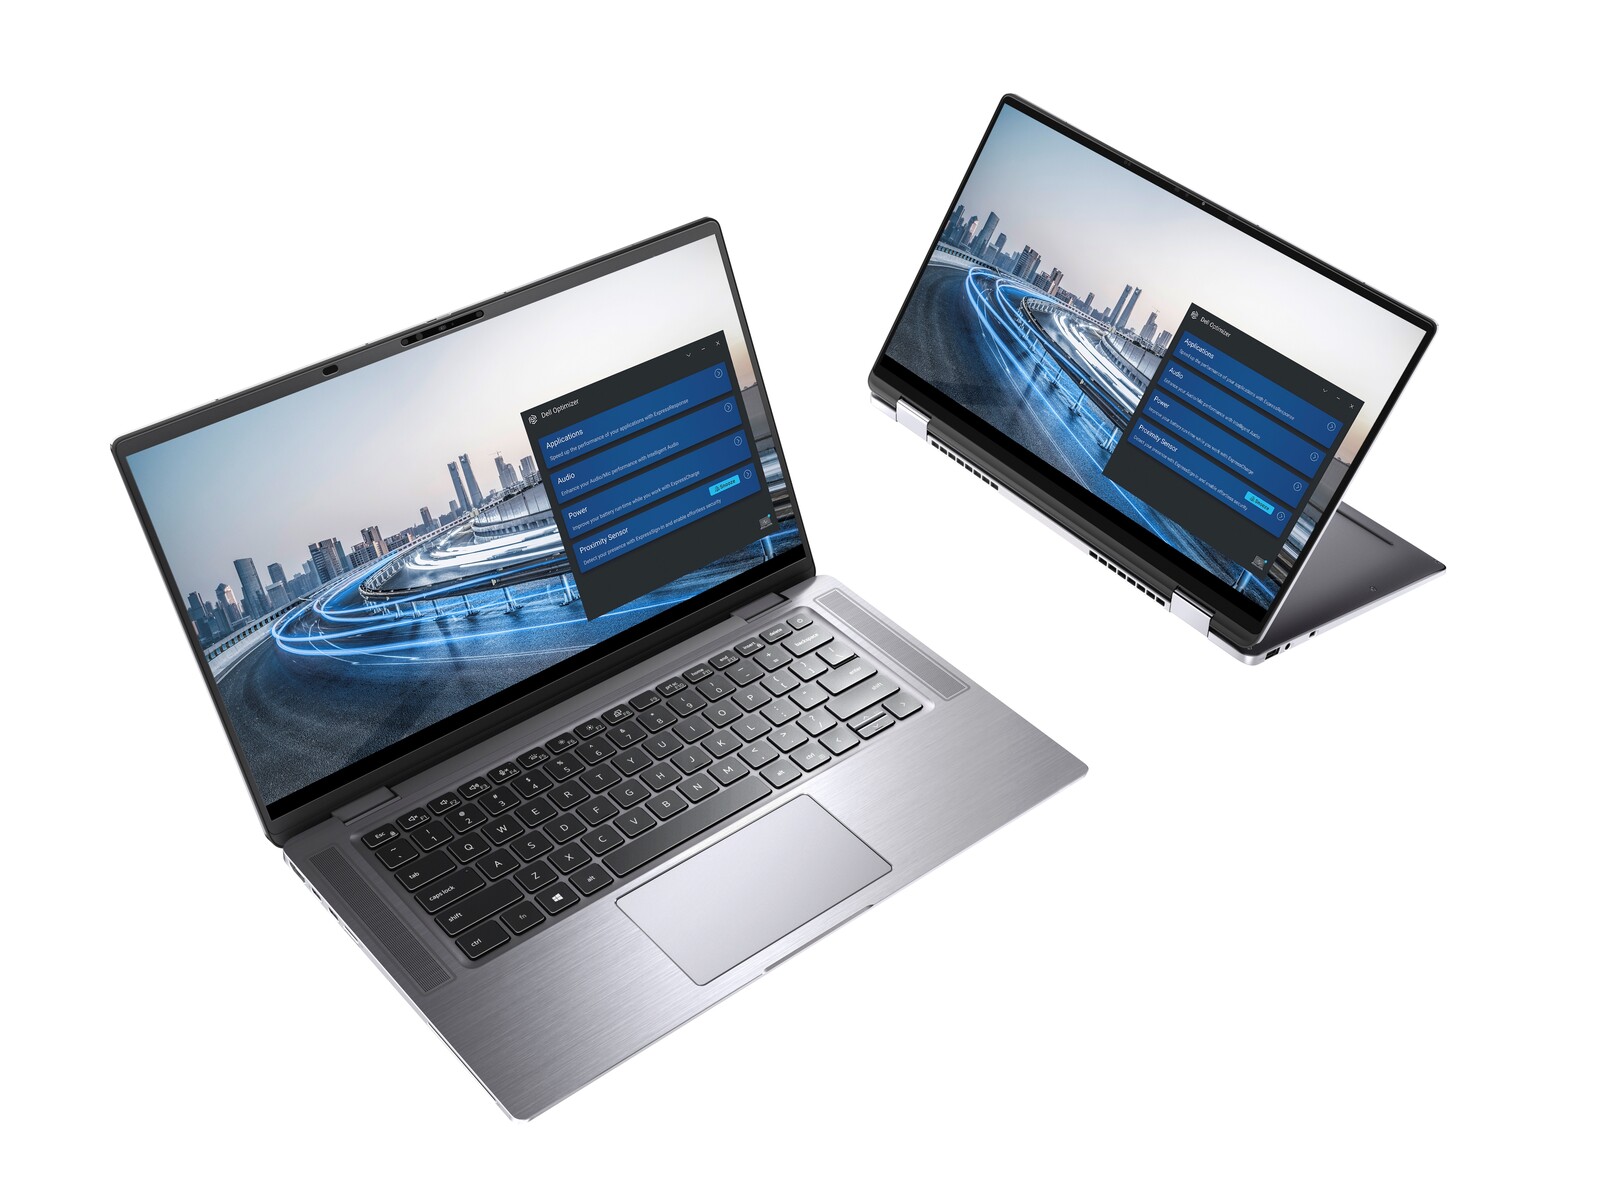 Dell Latitude 9510 and 9510 2-in-1 will come with 5G to kickstart